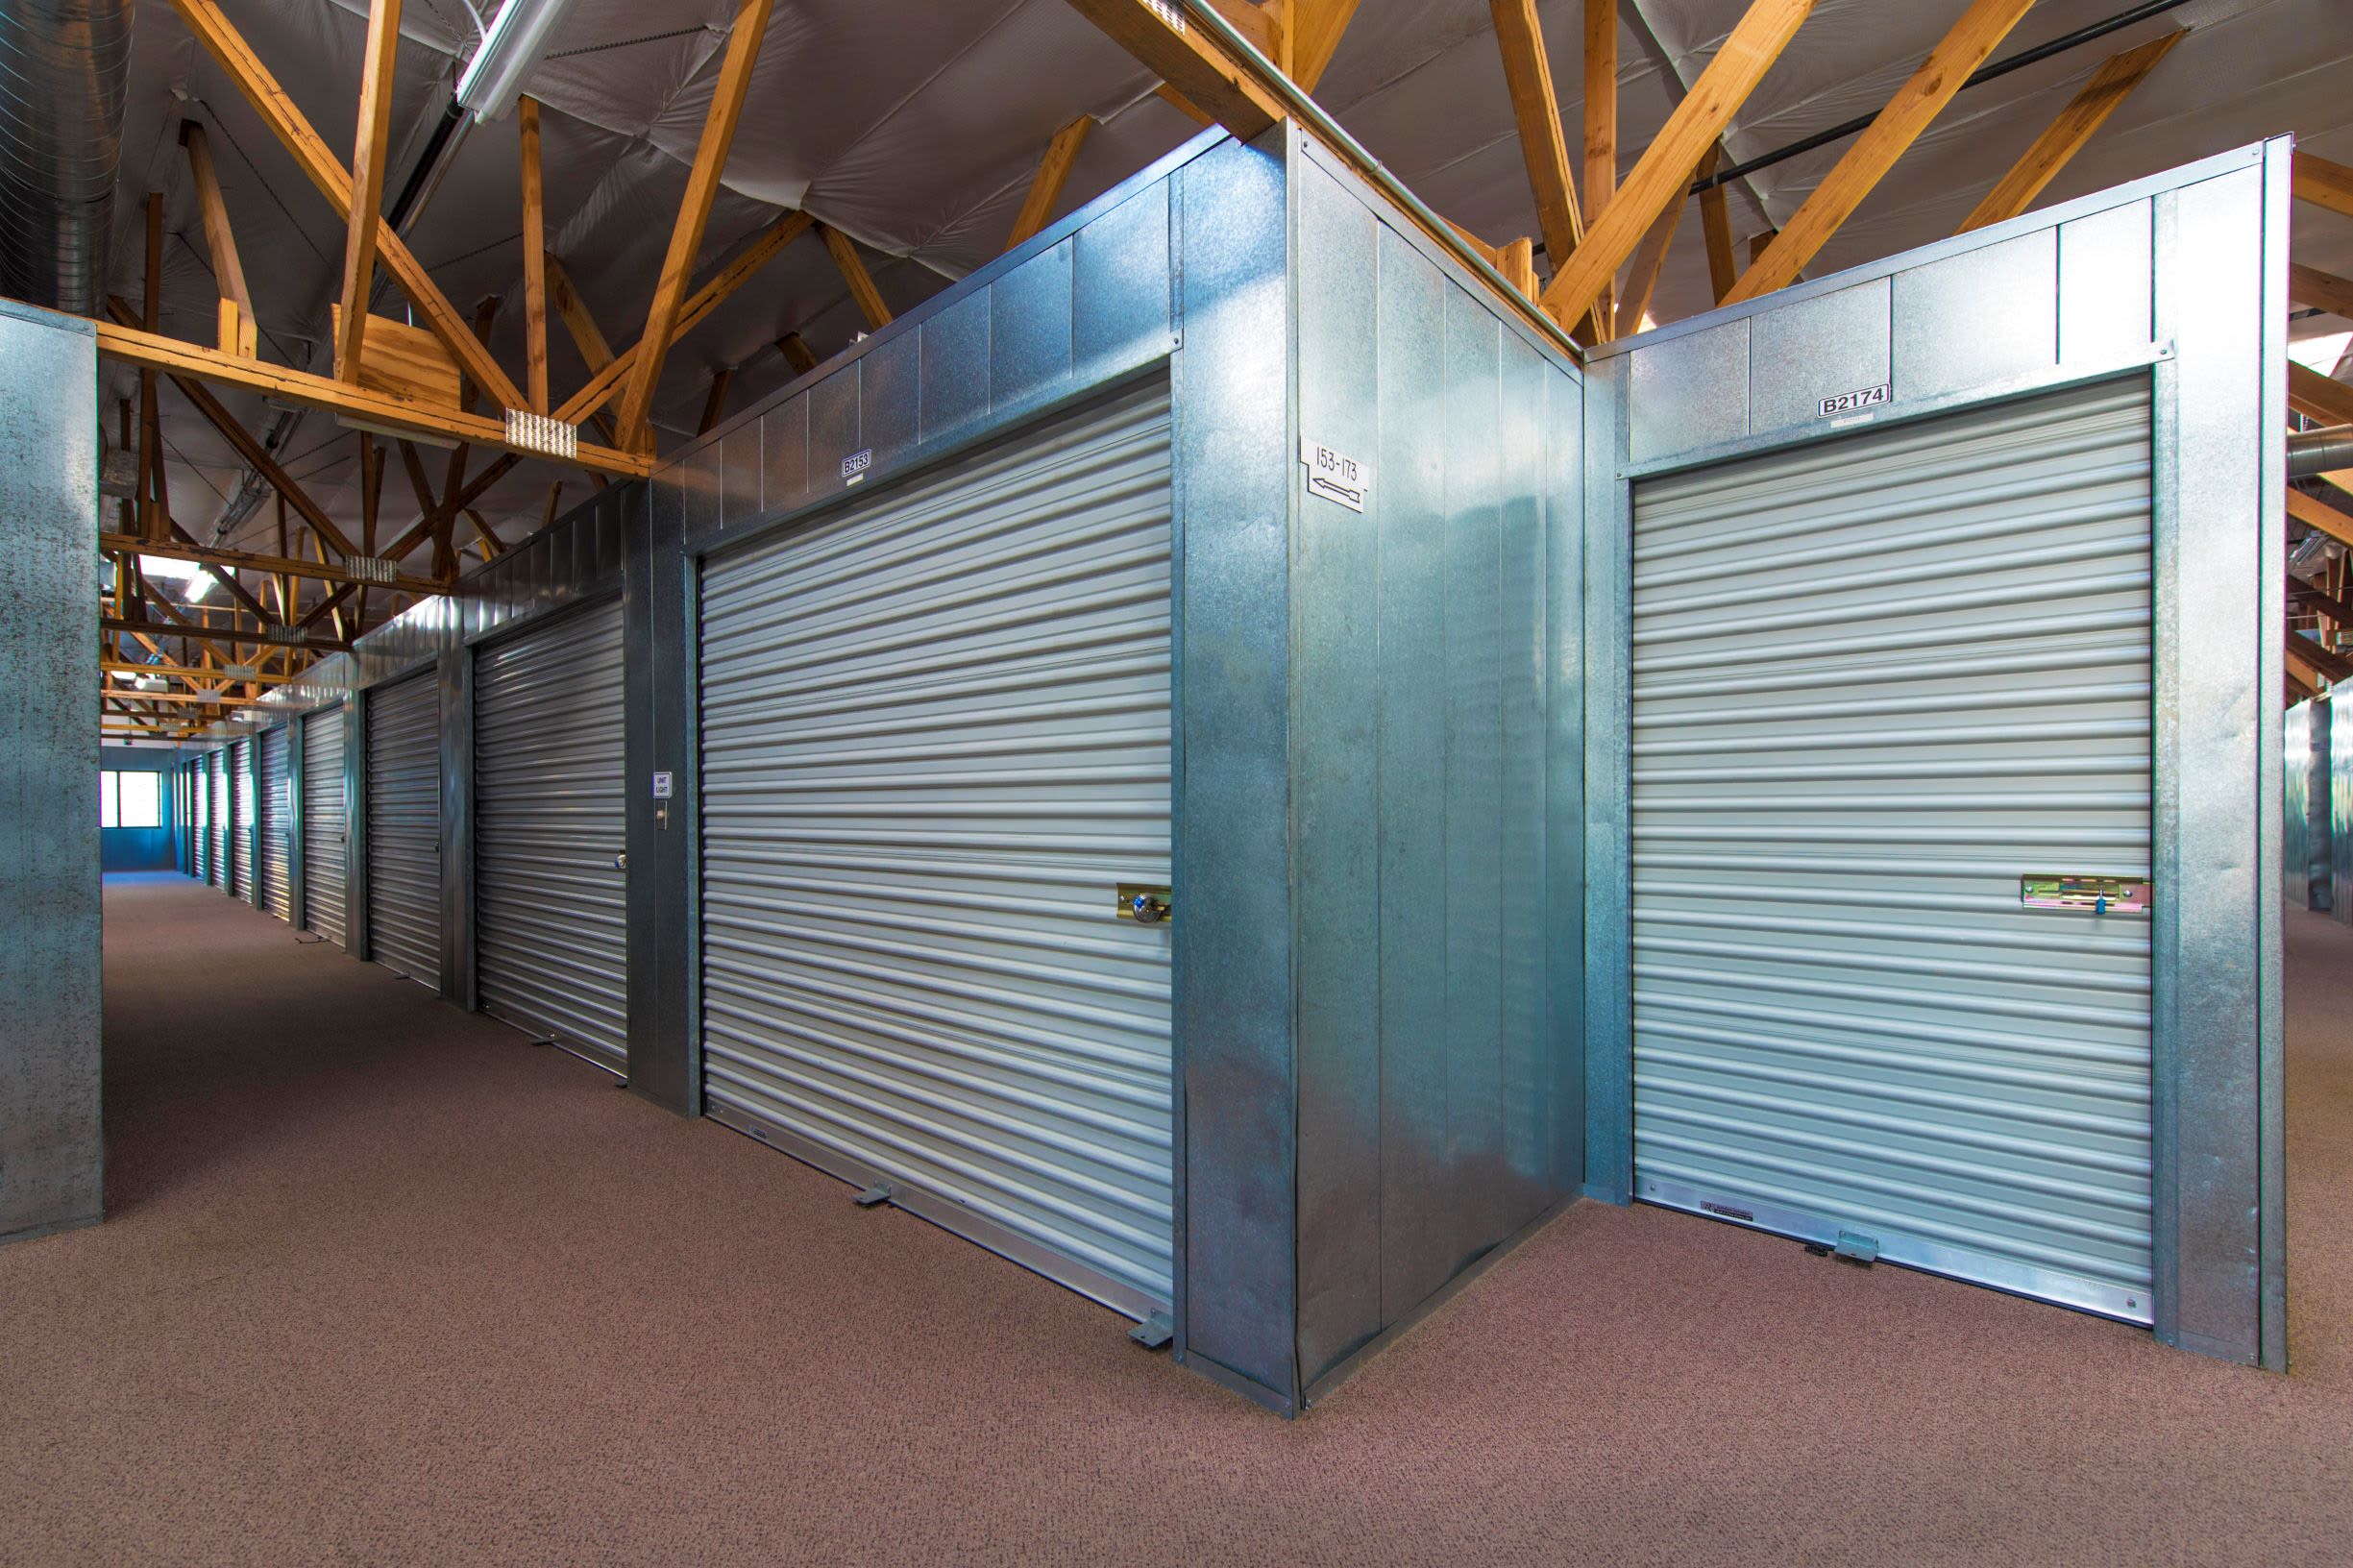 A row of storage units in a hallway at Poway Road Mini Storage in Poway, CA